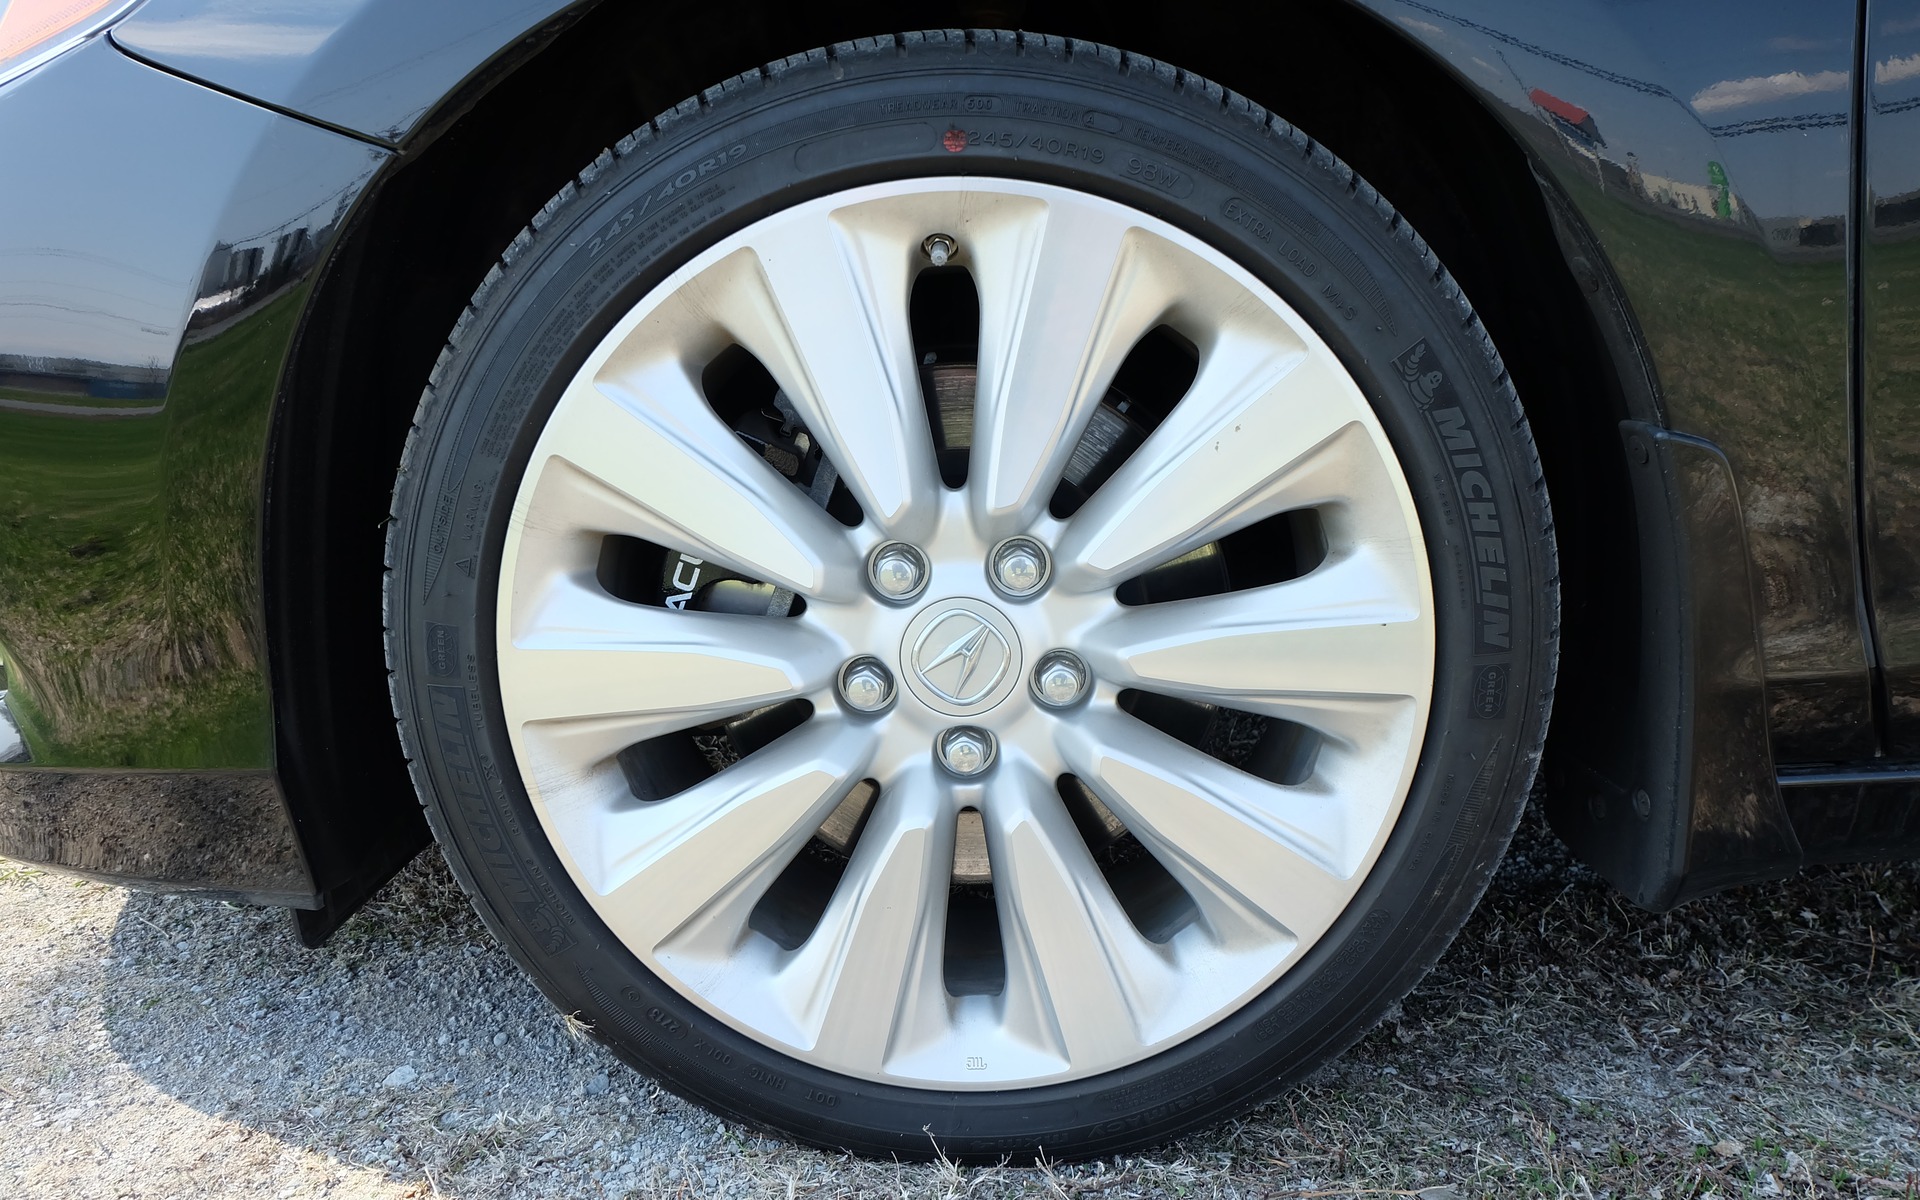 19-inch wheels are standard on the Sport Hybrid.